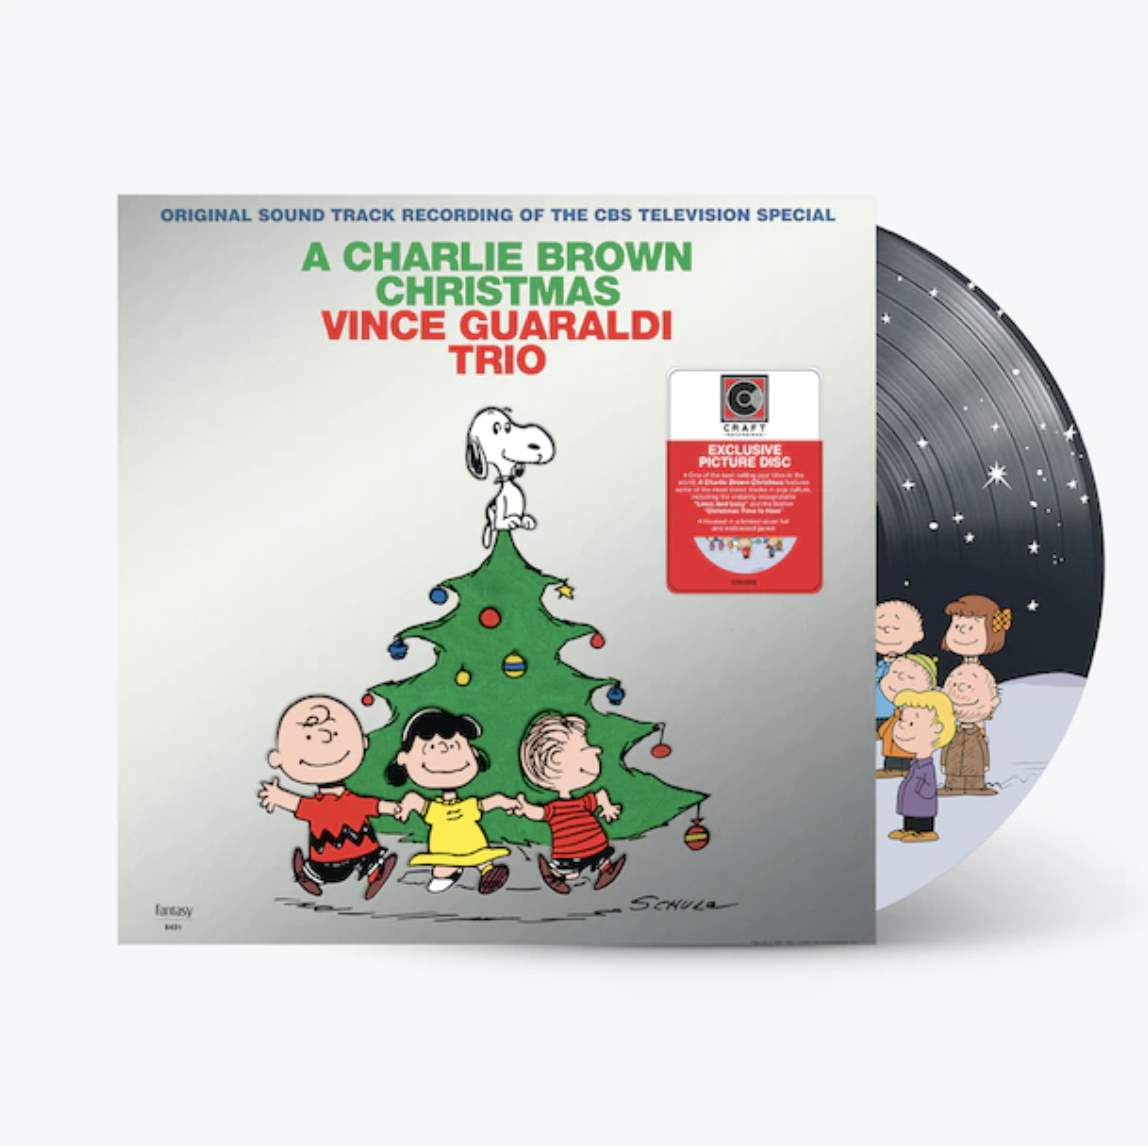 [DAMAGED] Vince Guaraldi Trio - A Charlie Brown Christmas [Silver Foil Picture Disc]